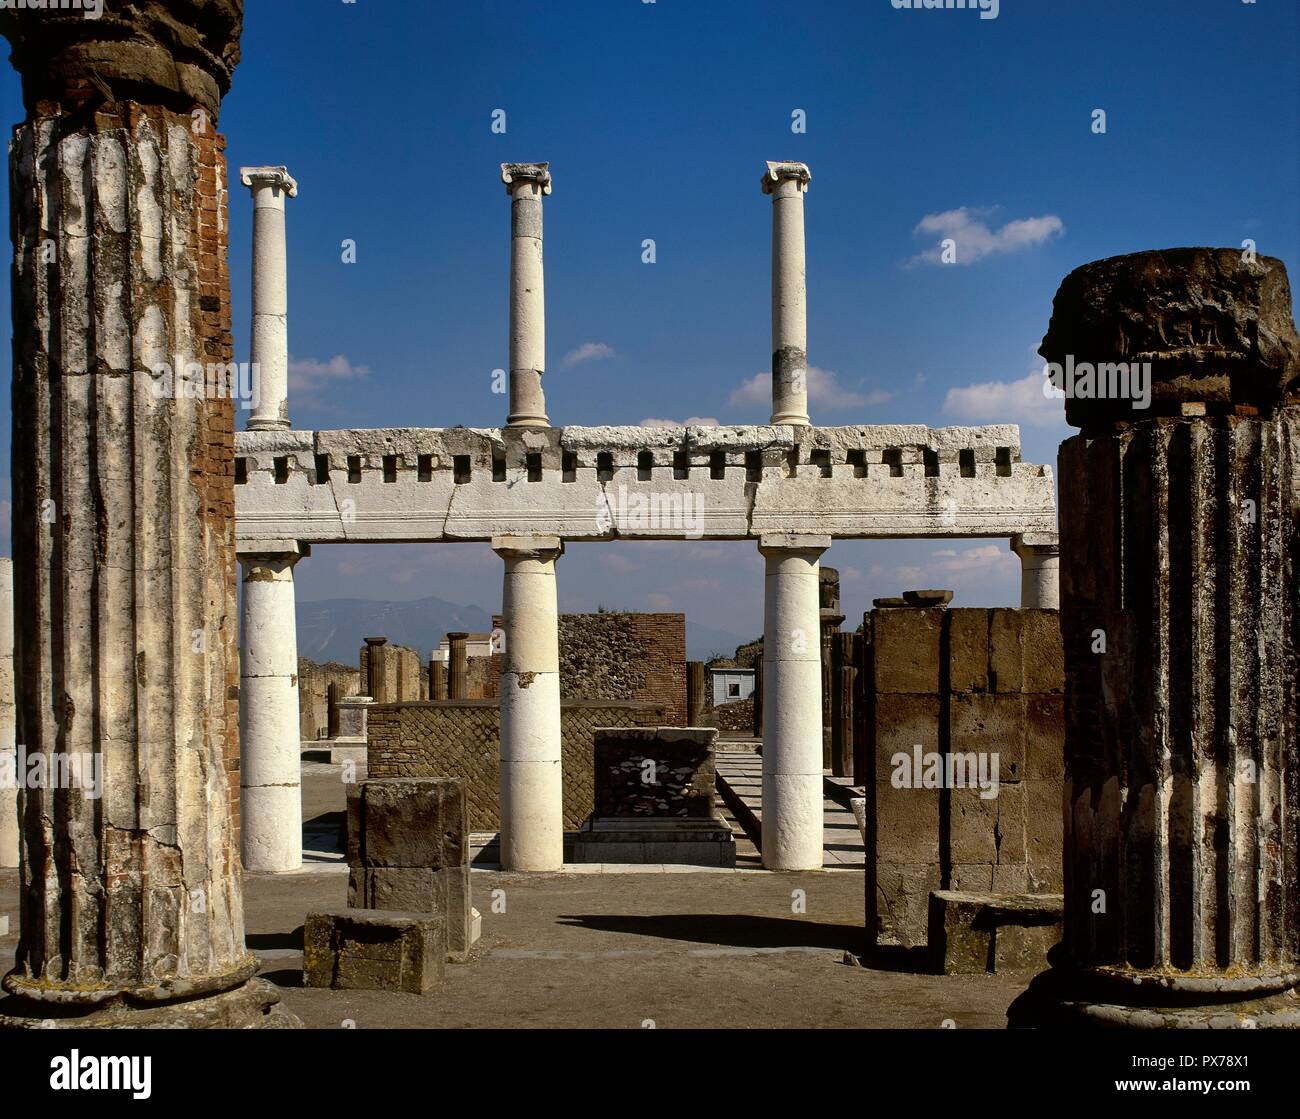 Italy. Pompeii. View of the Forum colonnade with the double order of the columns (Ionic in the upper part and Doric in the lower part) separated by an architrave. Limestone. Imperial epoch. La Campania. Stock Photo